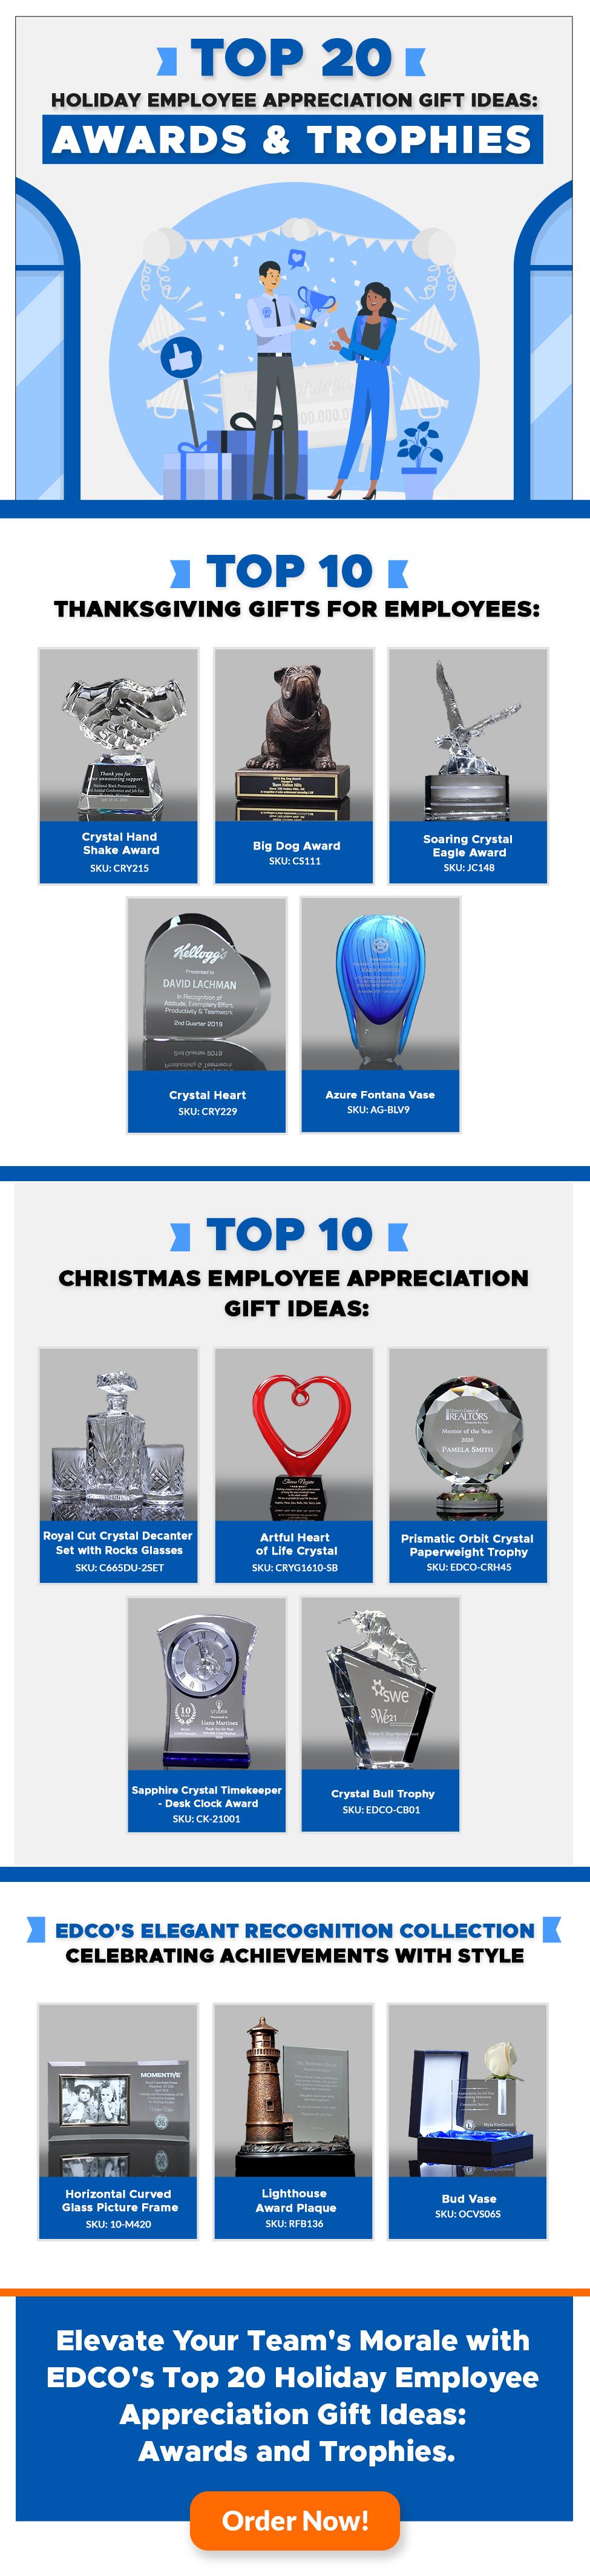 https://www.edco.com/images/uploaded/EDCO-Top-20-Holiday-Employee-Appreciation-Gift-Ideas-Infographic.jpg